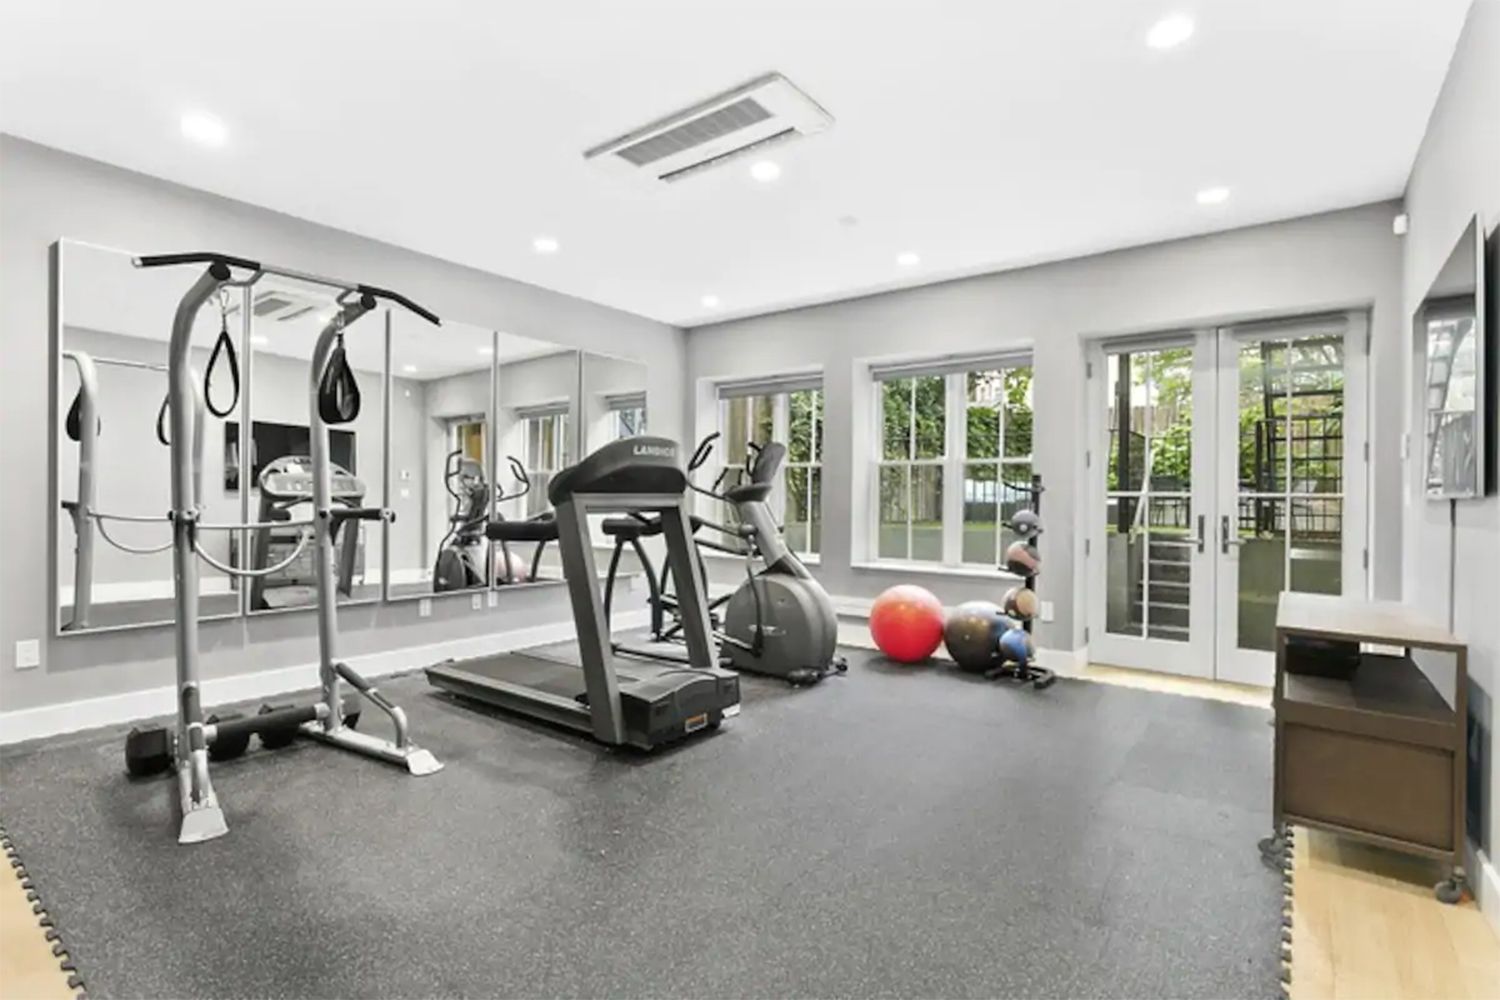 10 Airbnbs With Home Gyms for Working Out While on Vacation